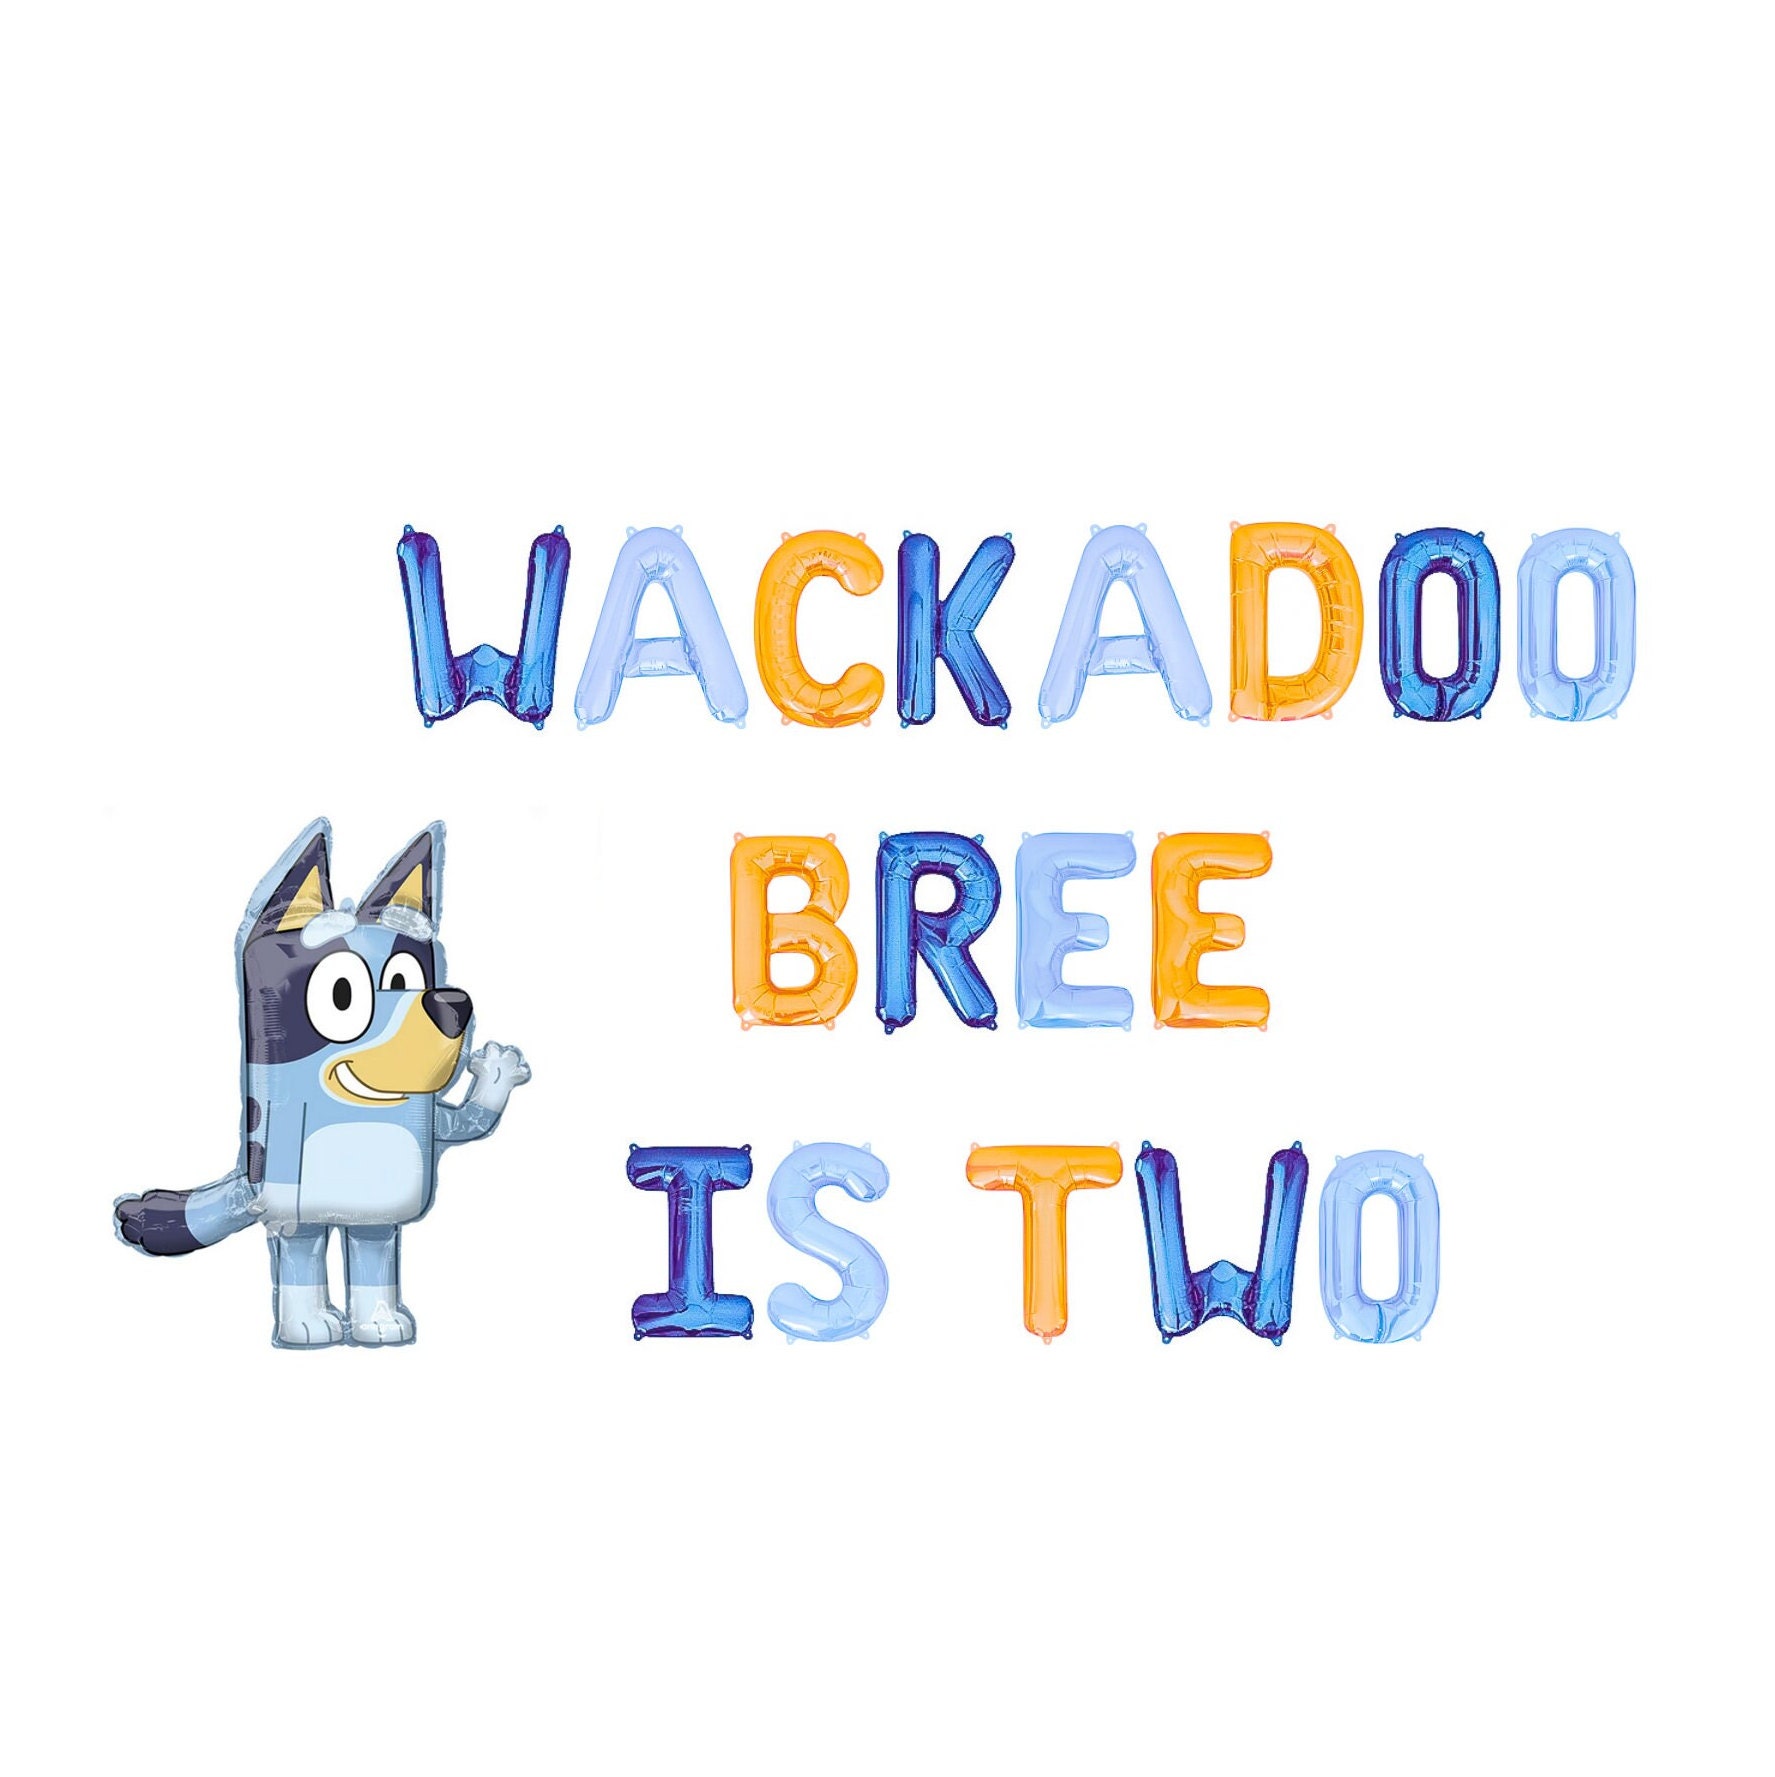 Wackadoo my kiddo turned 2! Wanted to share some of my decorations with  those who love this show! : r/bluey